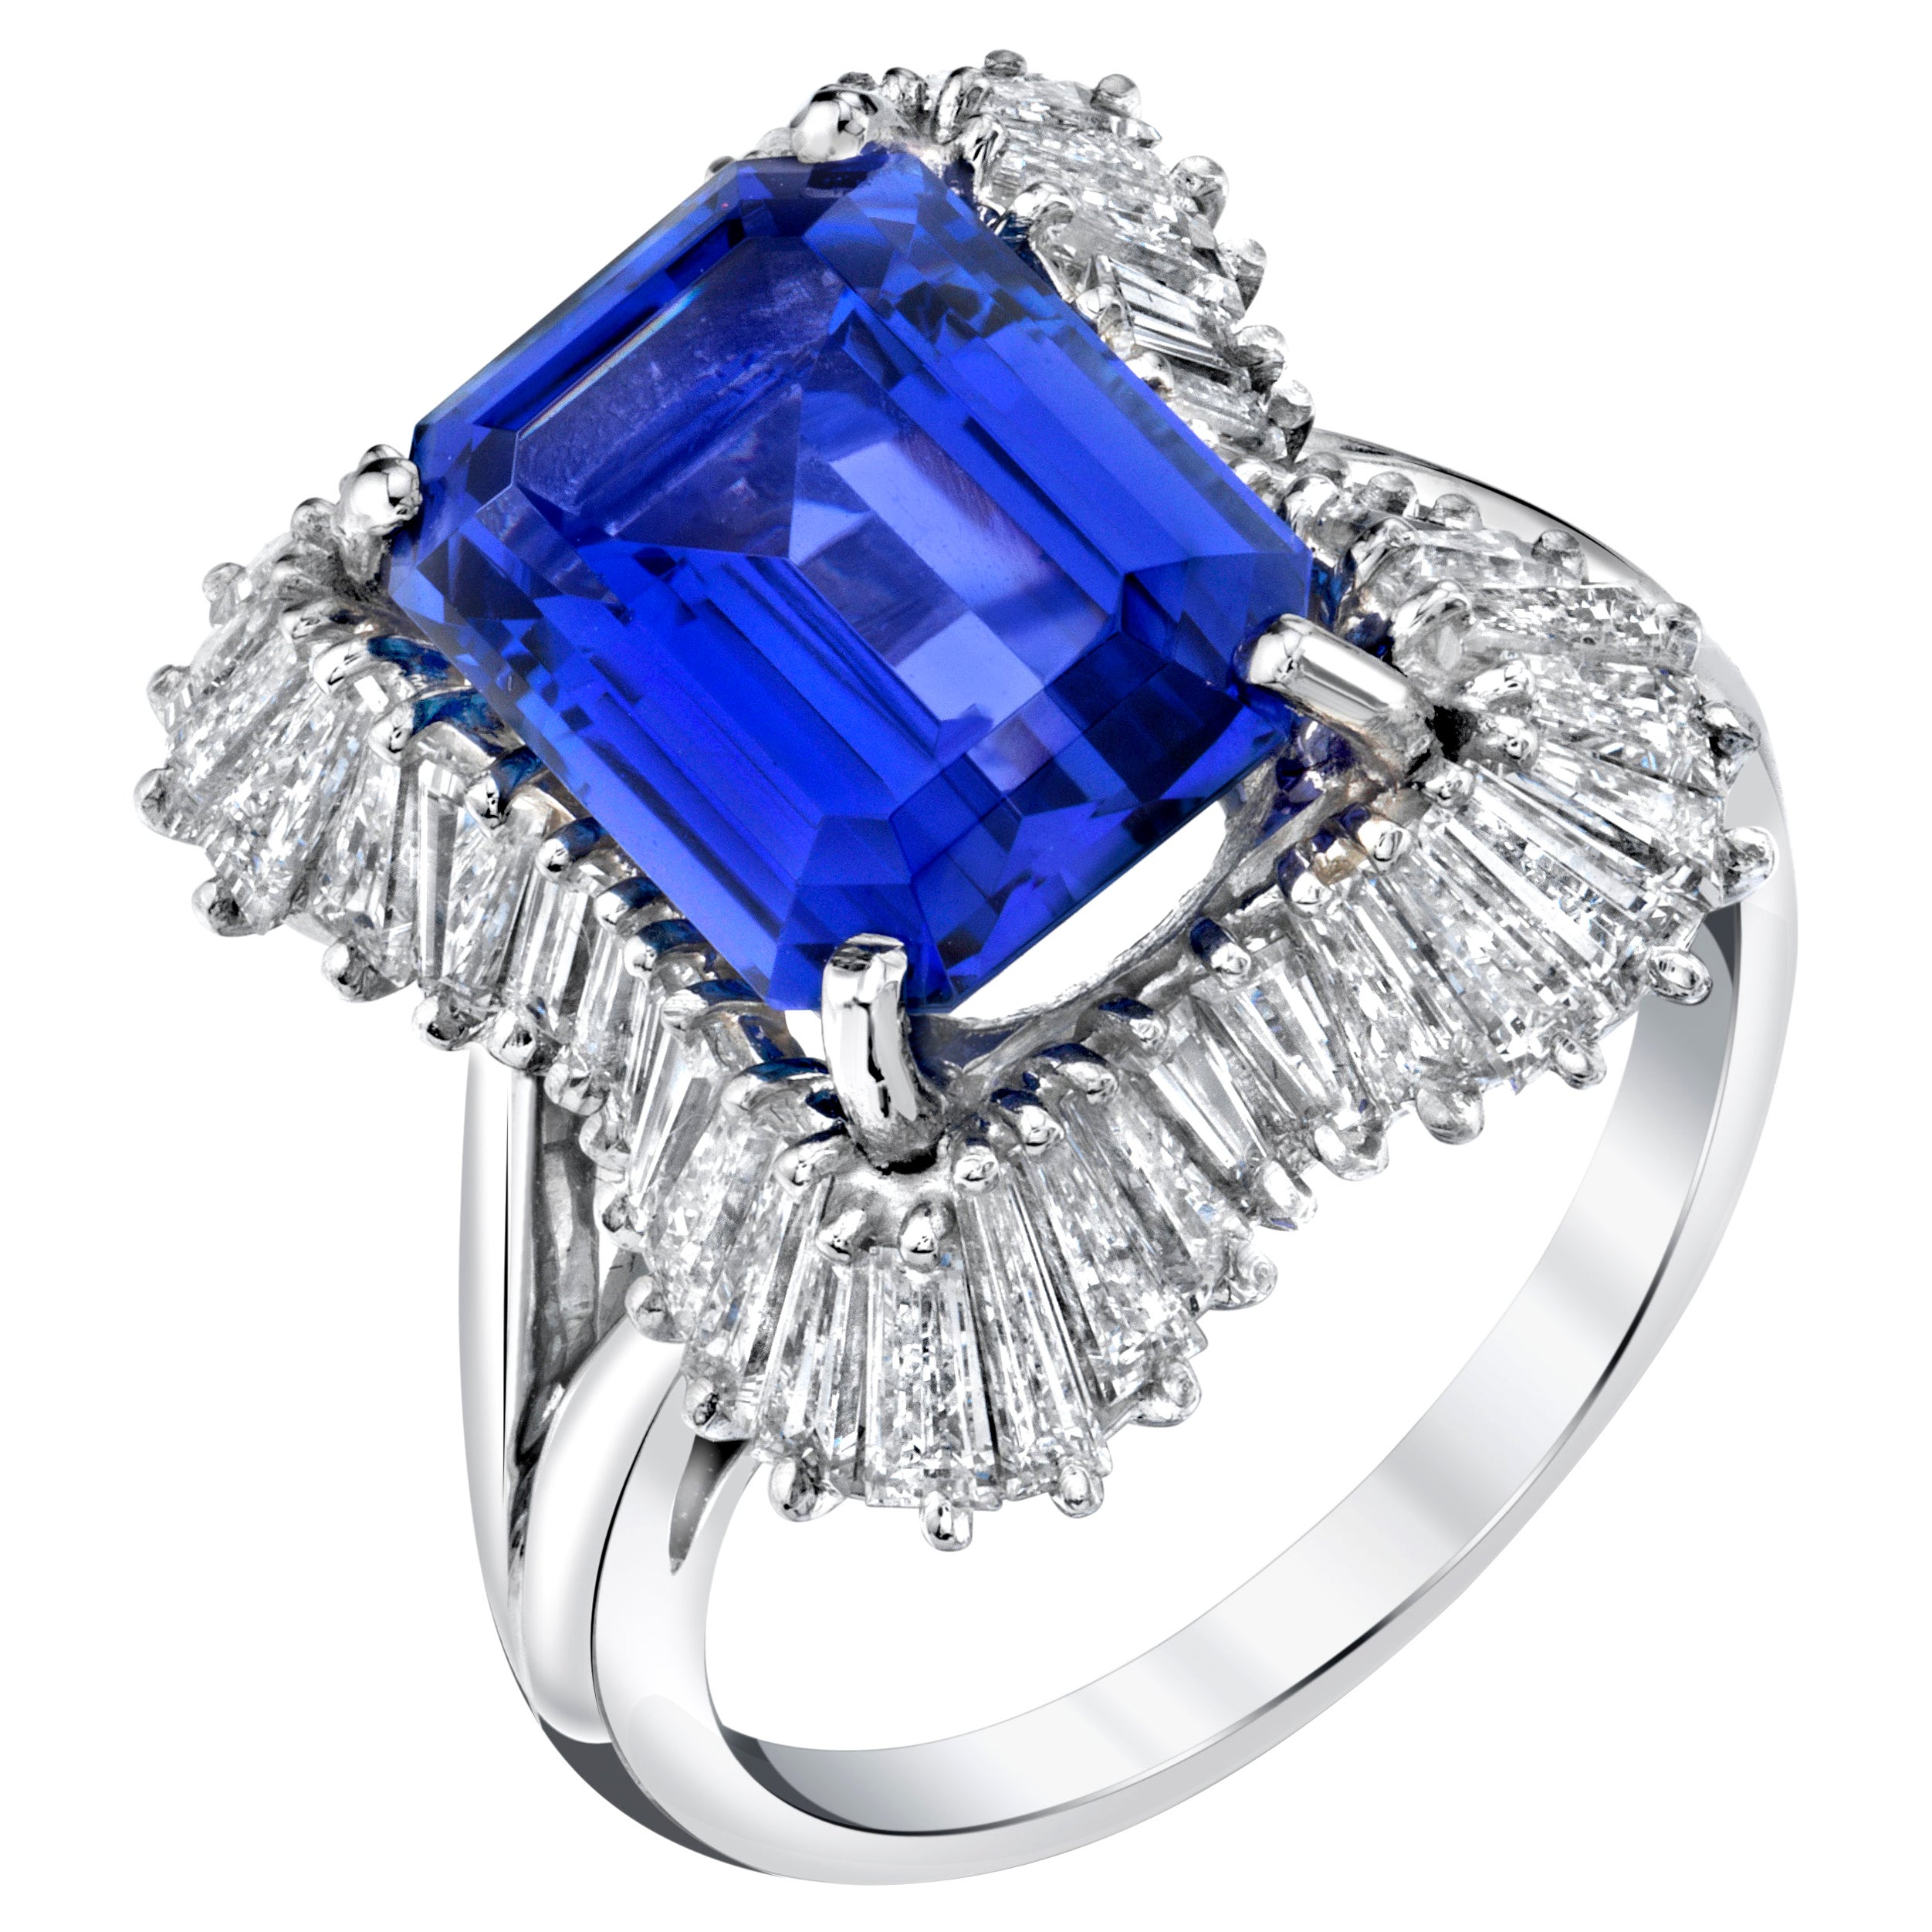 Tanzanite and Diamond Baguette Cocktail Ring in Platinum, 4.89 Carats